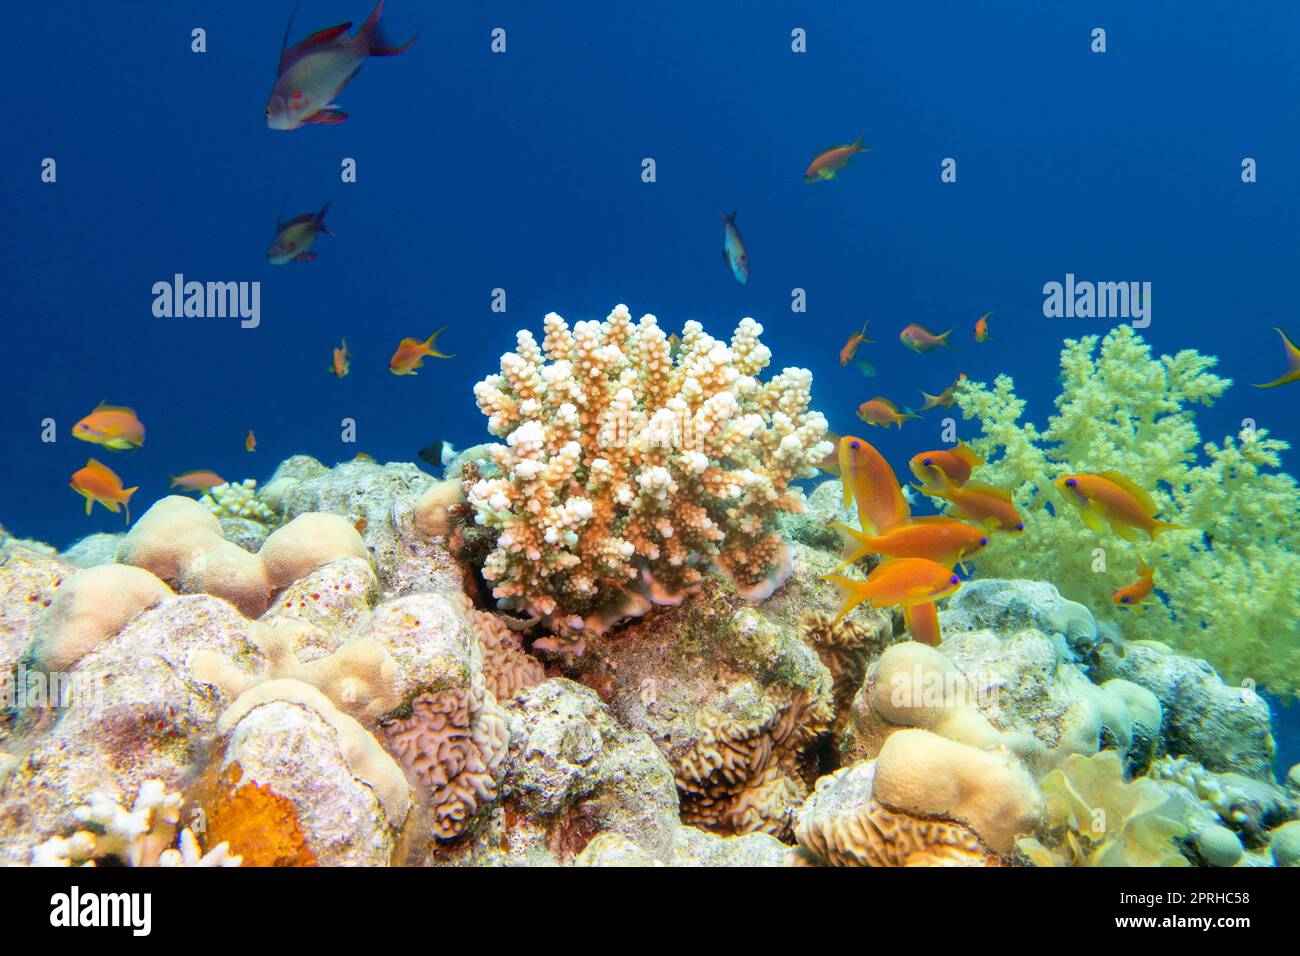 Colorful, picturesque coral reef at bottom of tropical sea, hard and soft corals with Anthias fishes, underwater landscape Stock Photo